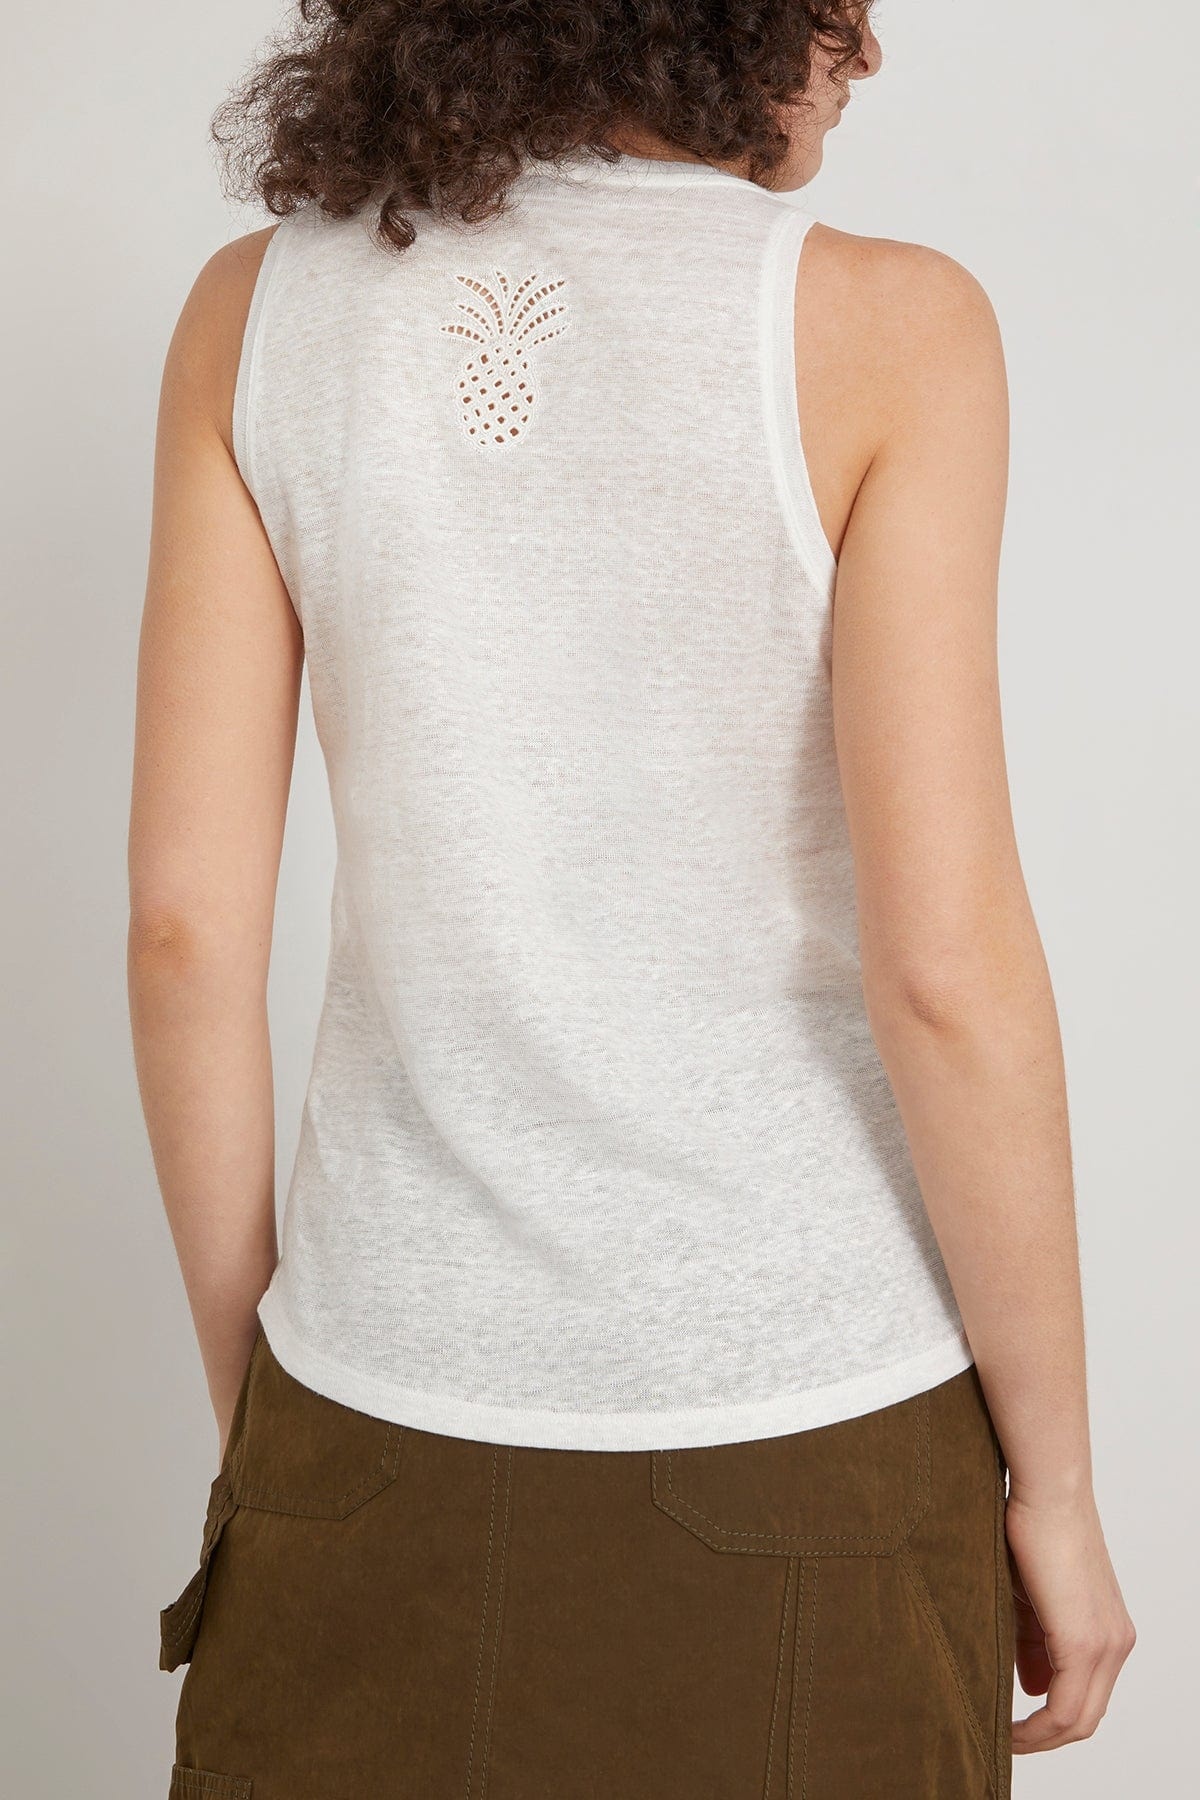 Natural Ease Sleeveless Top in Shaded White - 4